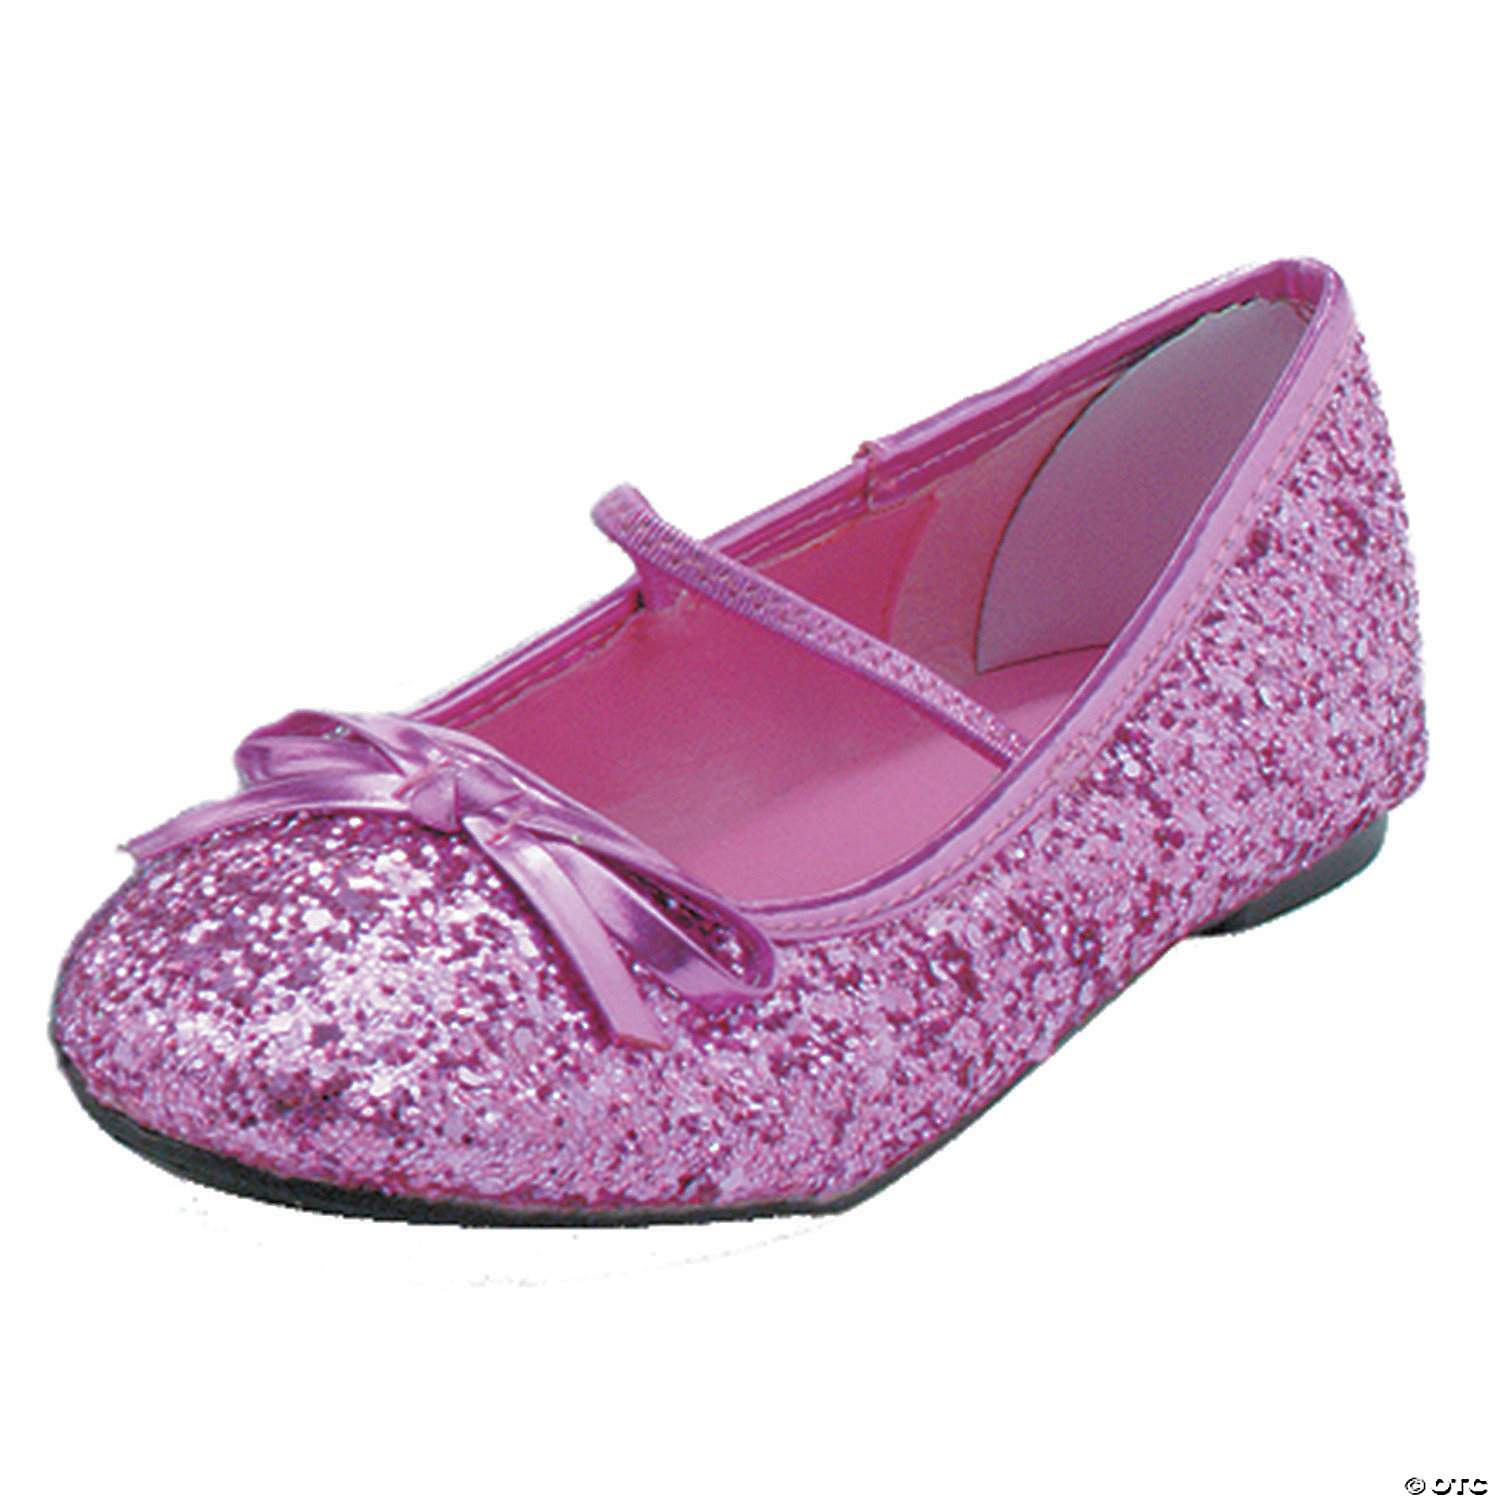 Kid's Pink Glitter Ballet Shoes - Size ...